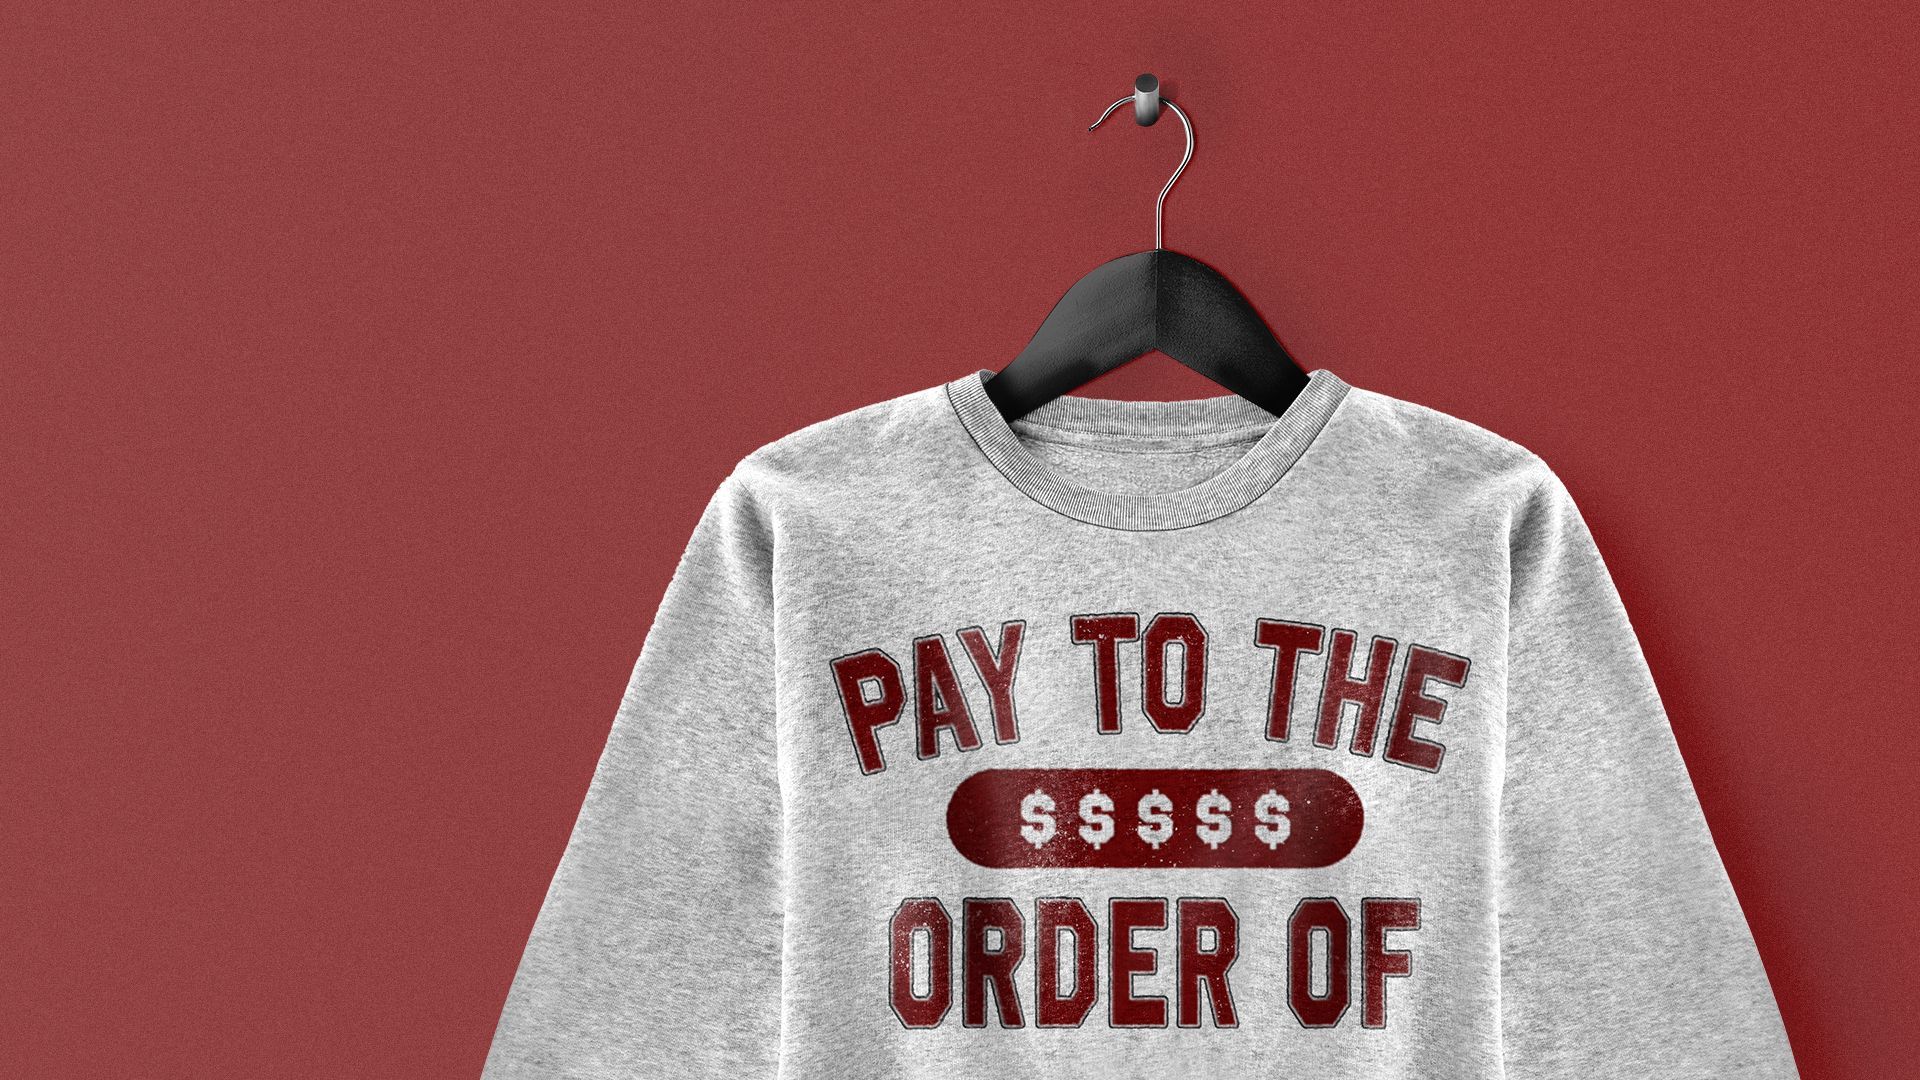 an illustration of a vintage heather grey sweatshirt with the words "pay to the order of" on it 